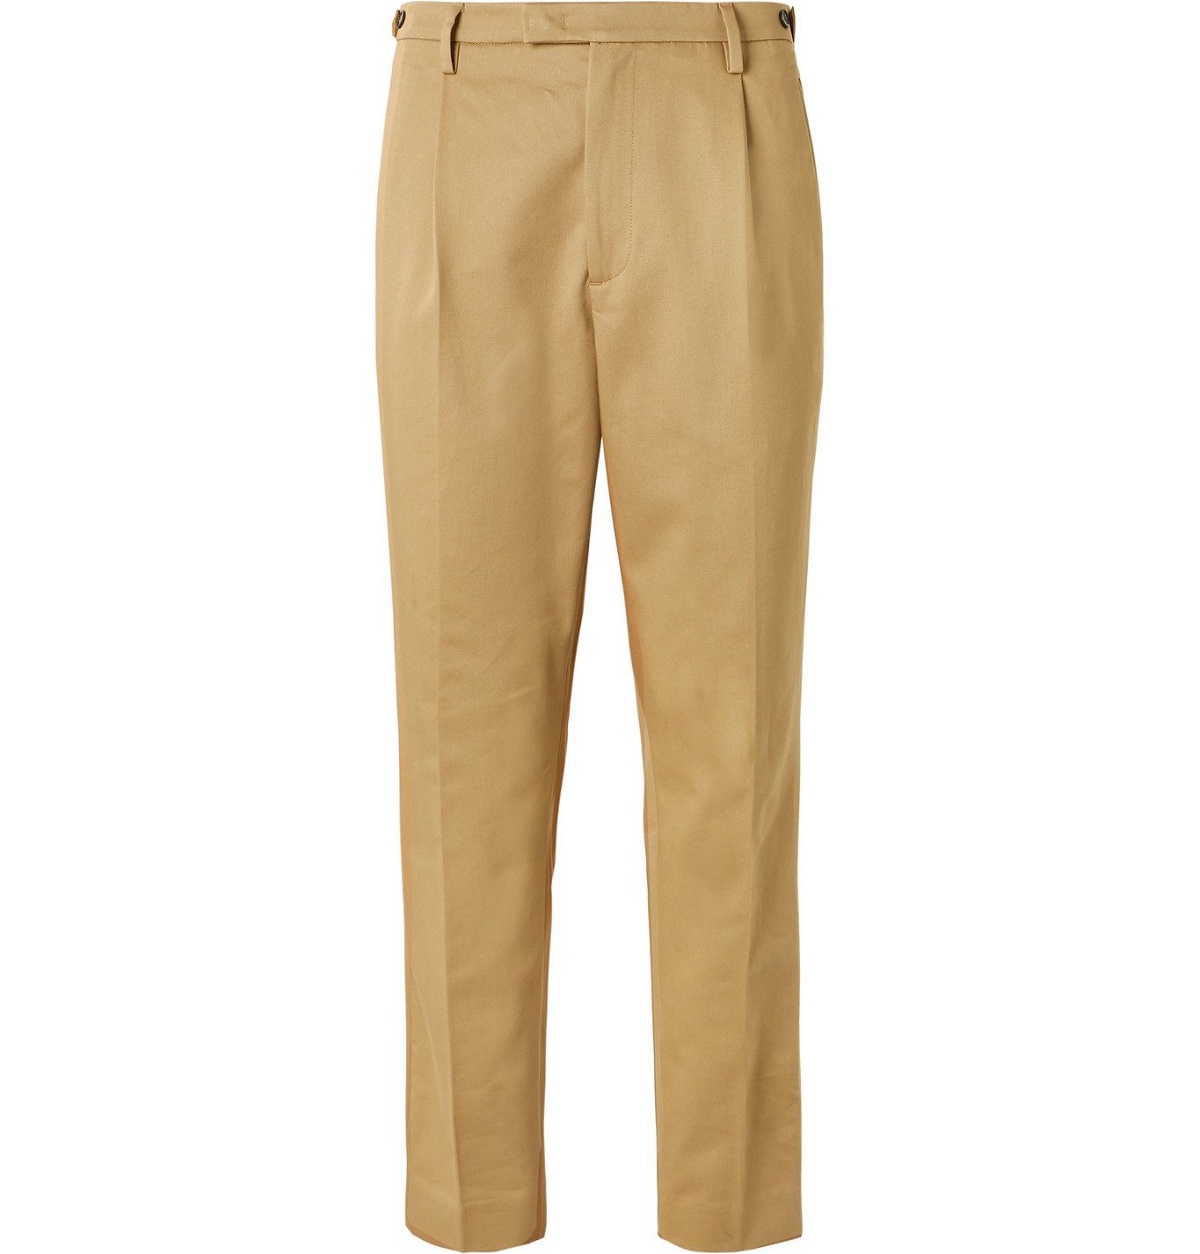 Barena - Masco Tapered Pleated Cotton-Twill Trousers - Brown Barena